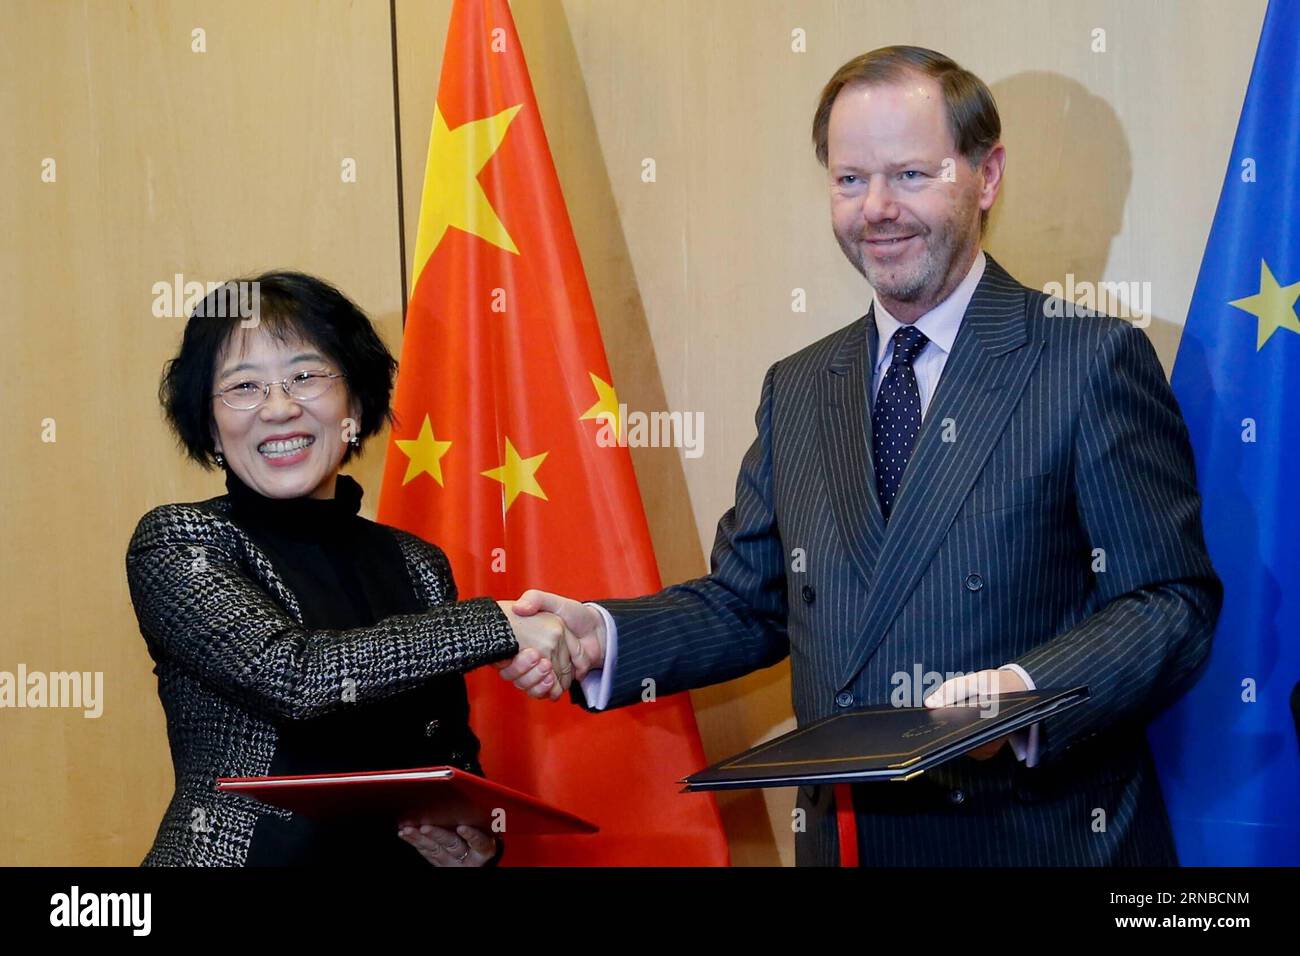 Yang Yanyi (L), head of the Chinese Mission to the European Union (EU), shakes hands with Pieter de Gooijer, permanent representative of the Netherlands to the EU, which currently holds the EU Presidency, during a signing ceremony of the agreement in Brussels, Belgium, Feb. 29, 2016. China and the EU on Monday signed a reciprocal short stay visa waiver agreement for holders of diplomatic passports. ) BELGIUM-BRUSSELS-EU-CHINA-VISA YexPingfan PUBLICATIONxNOTxINxCHN   Yang Yanyi l Head of The Chinese Mission to The European Union EU Shakes Hands With Pieter de  permanently Representative of The Stock Photo